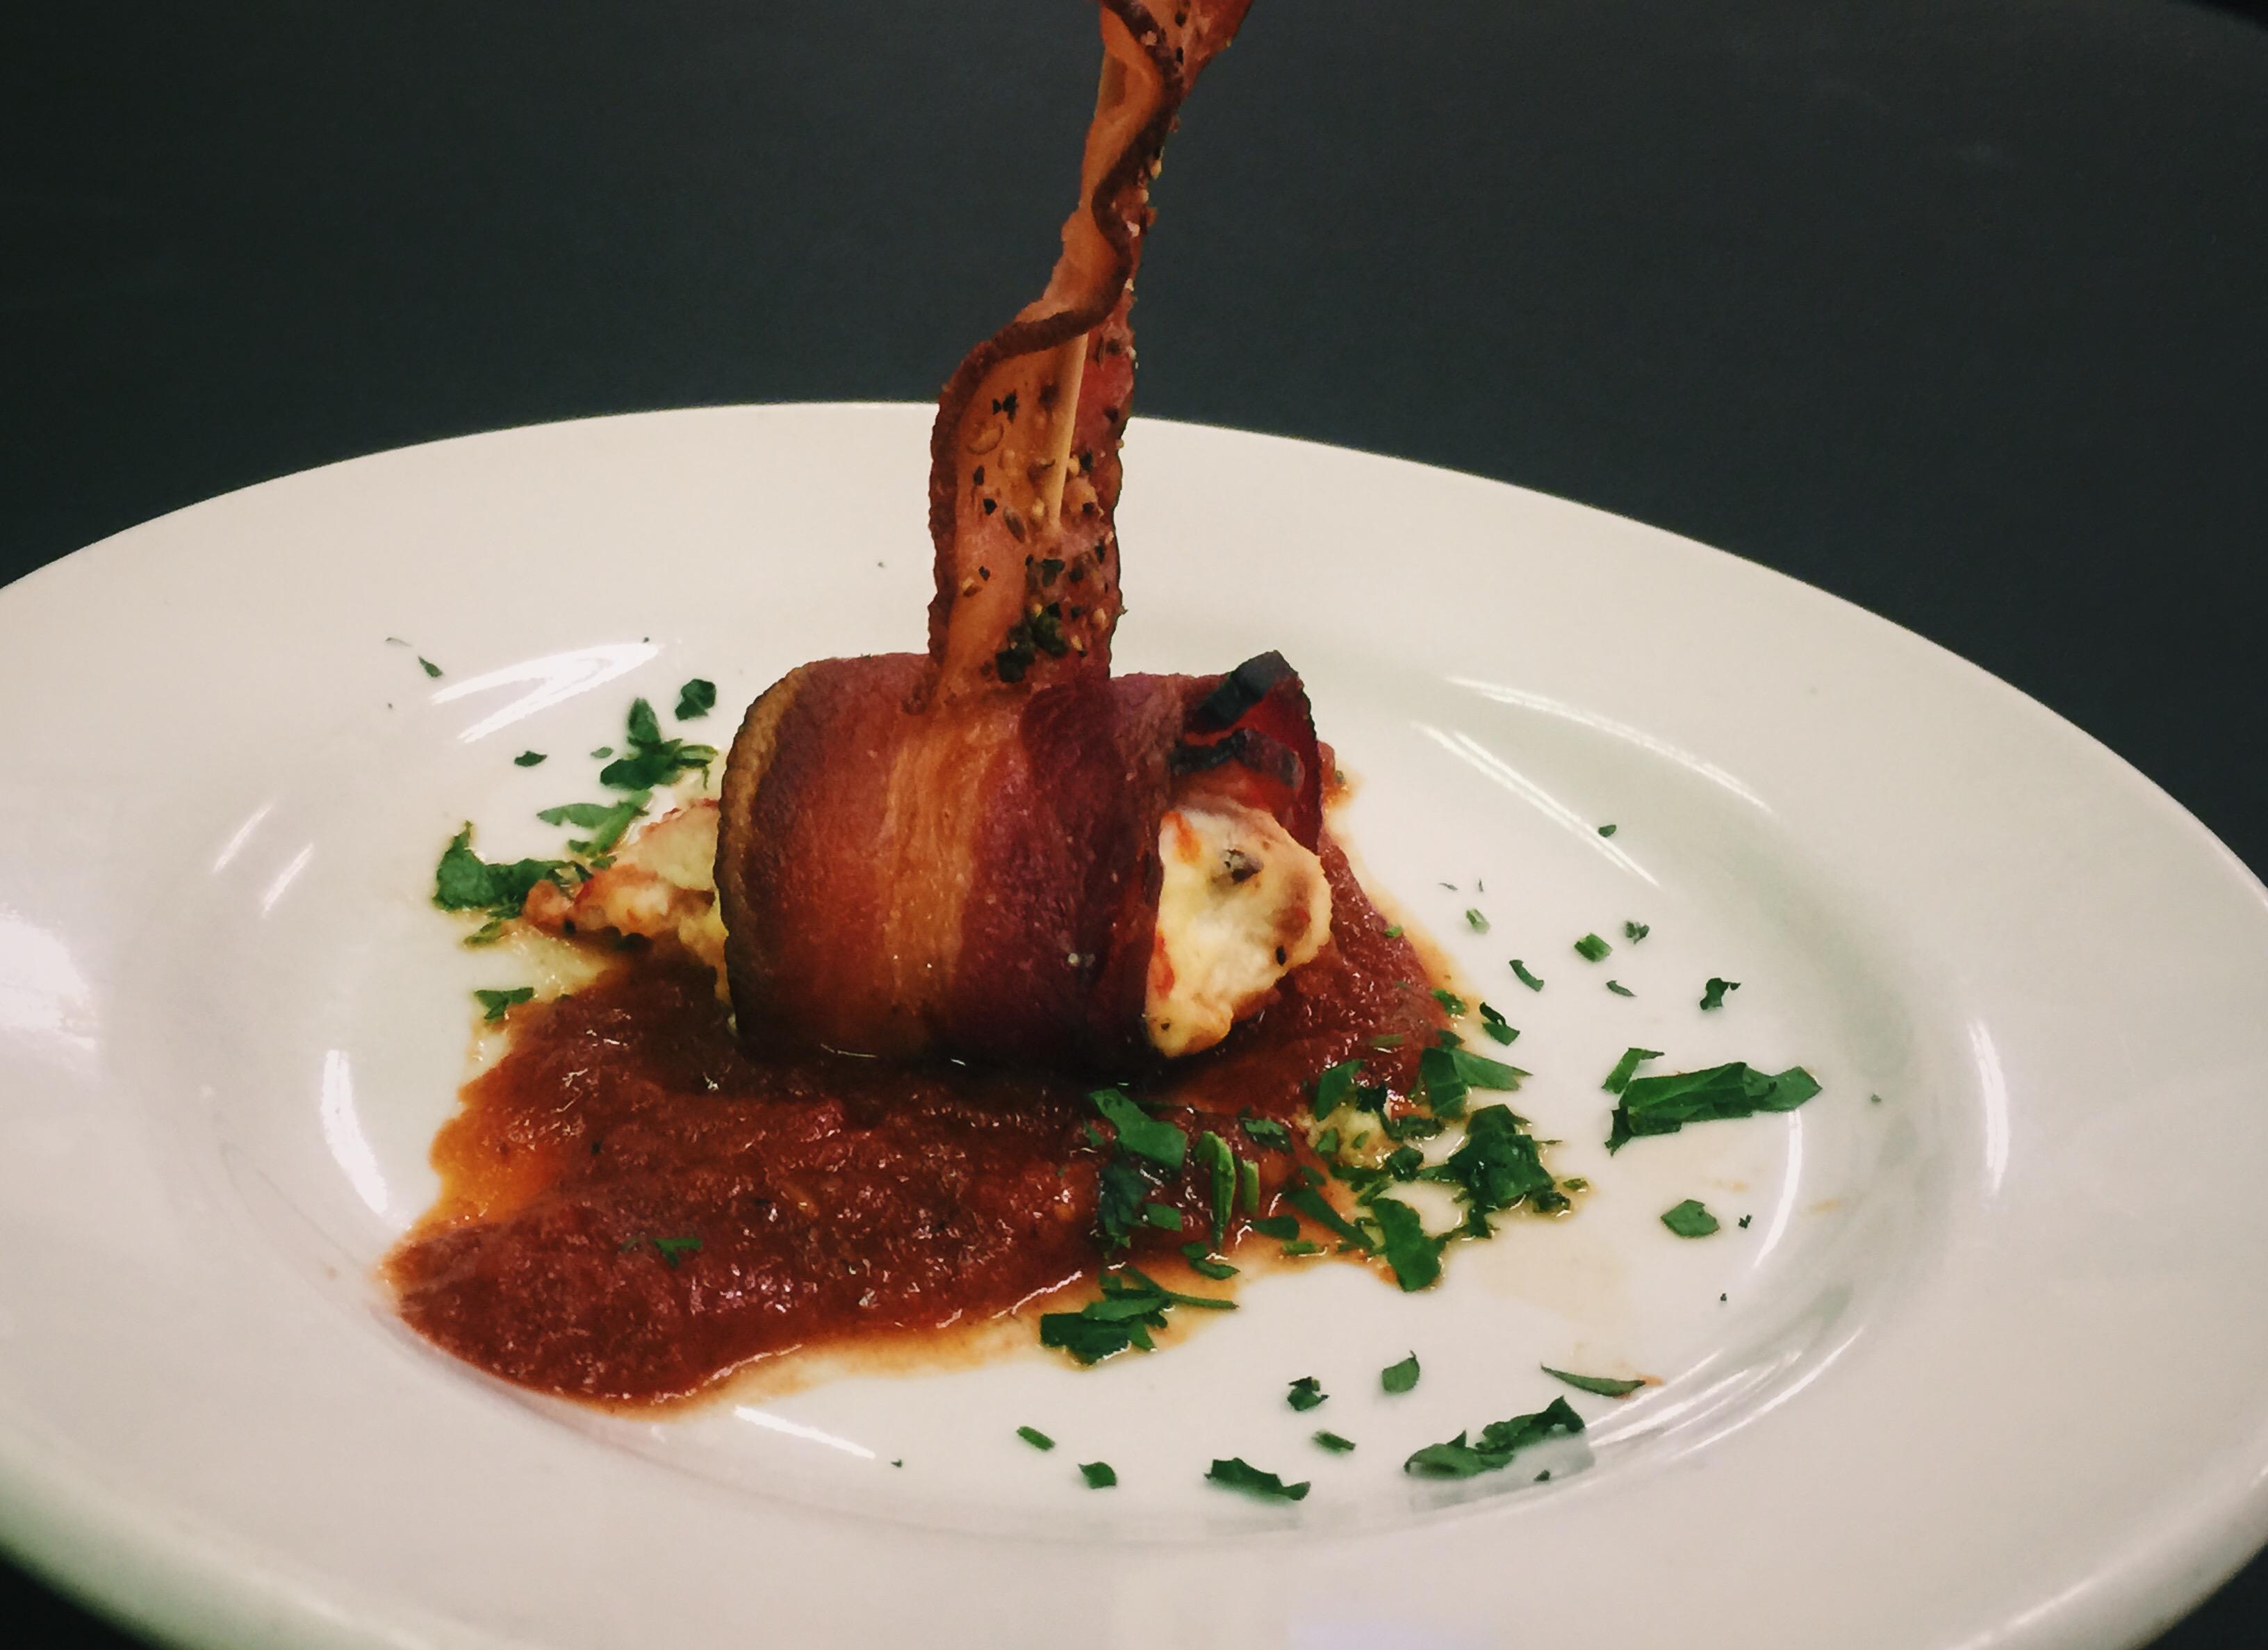 Chef Joe Torres' Bacon Lobster Manicotti is one of the many bacon-oriented dishes available at Baconfest. (Courtesy of Italian Village Restaurants)